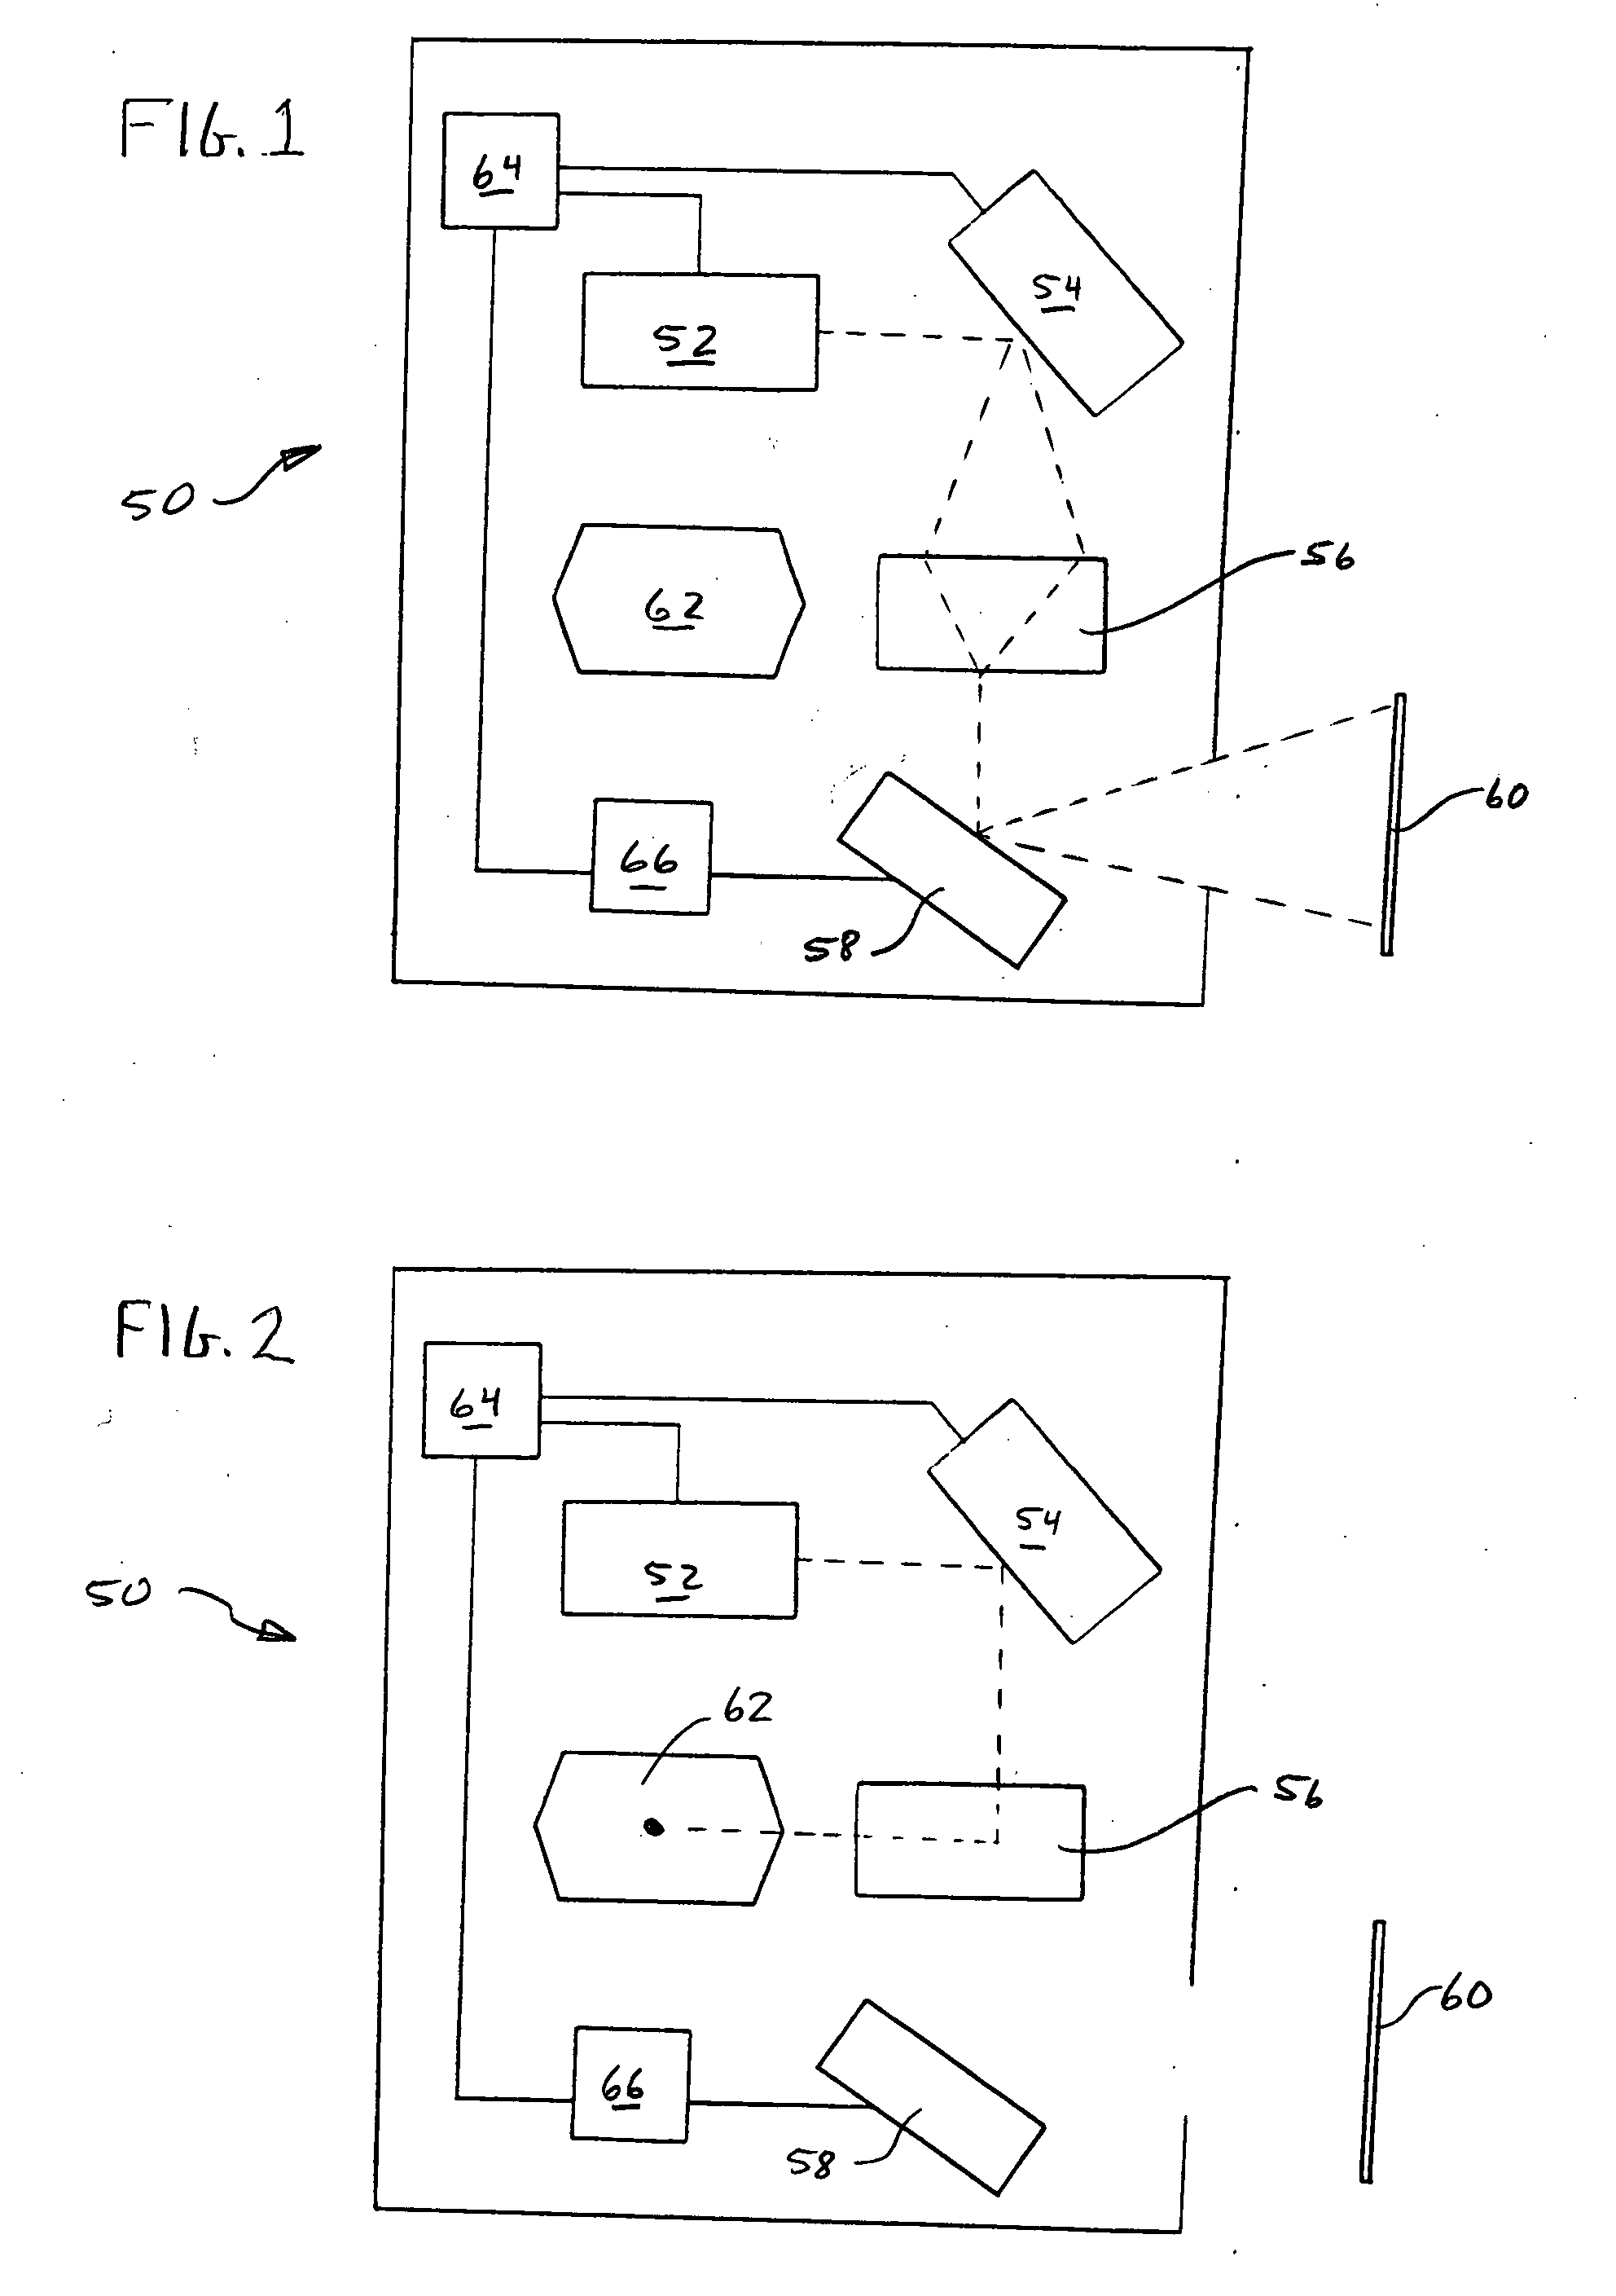 Shuttering system for scanning projectors